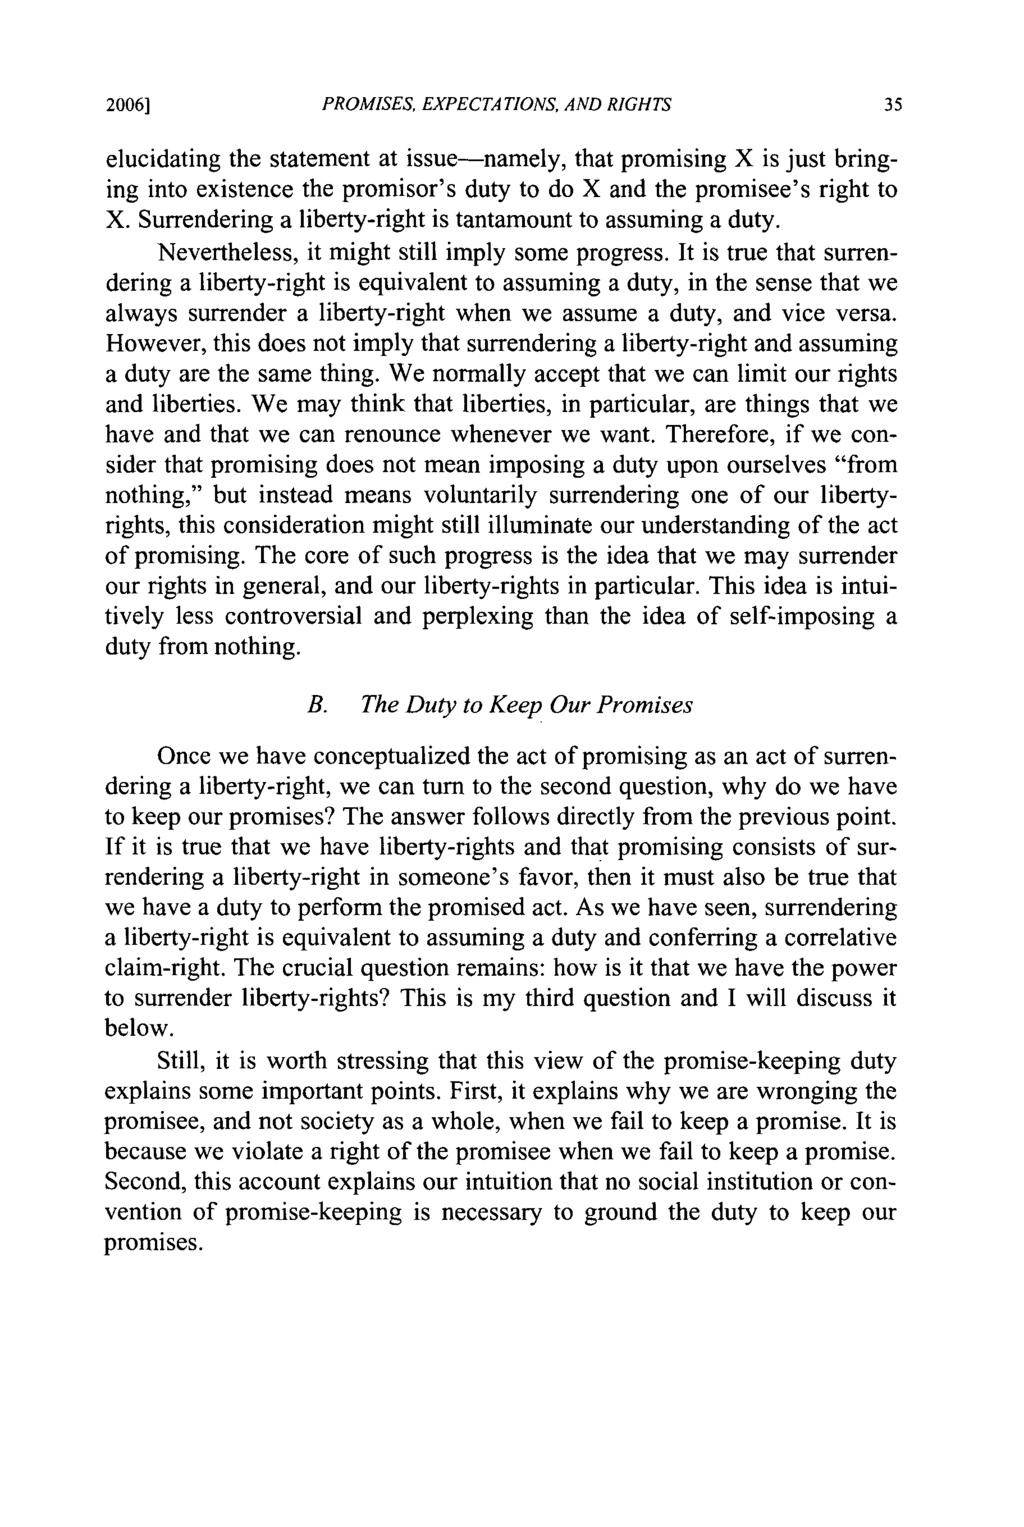 2006] PROMISES, EXPECTATIONS, AND RIGHTS elucidating the statement at issue-namely, that promising X is just bringing into existence the promisor's duty to do X and the promisee's right to X.